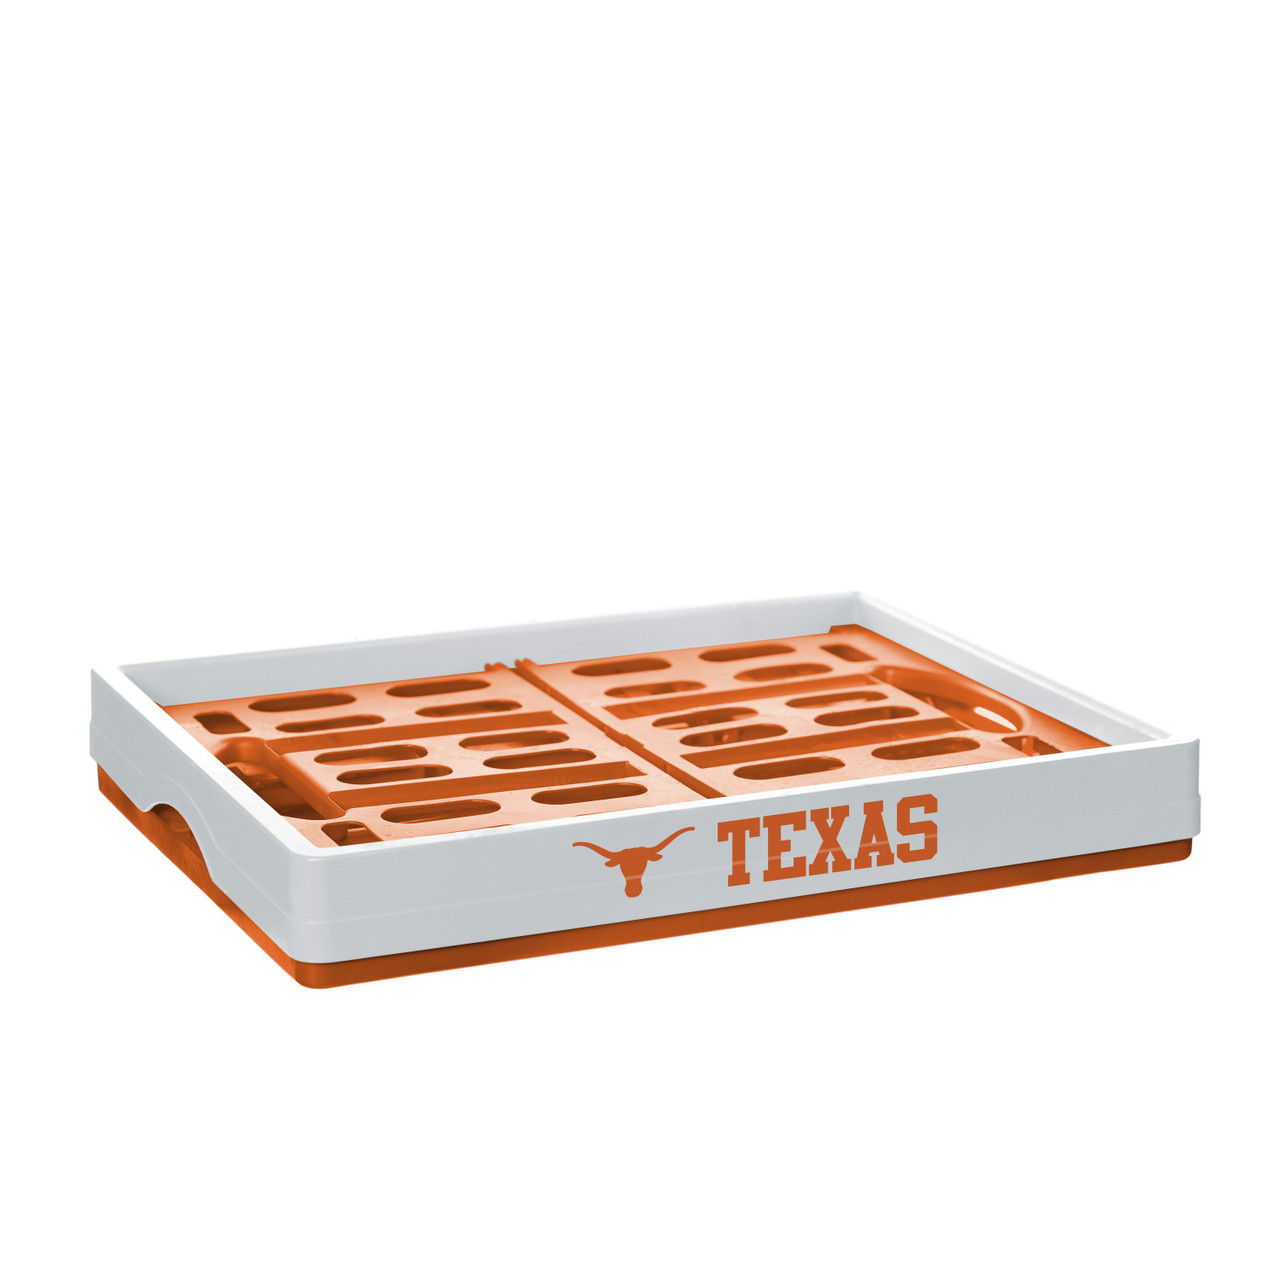 Texas Longhorns Team Collapsible Storage Crate